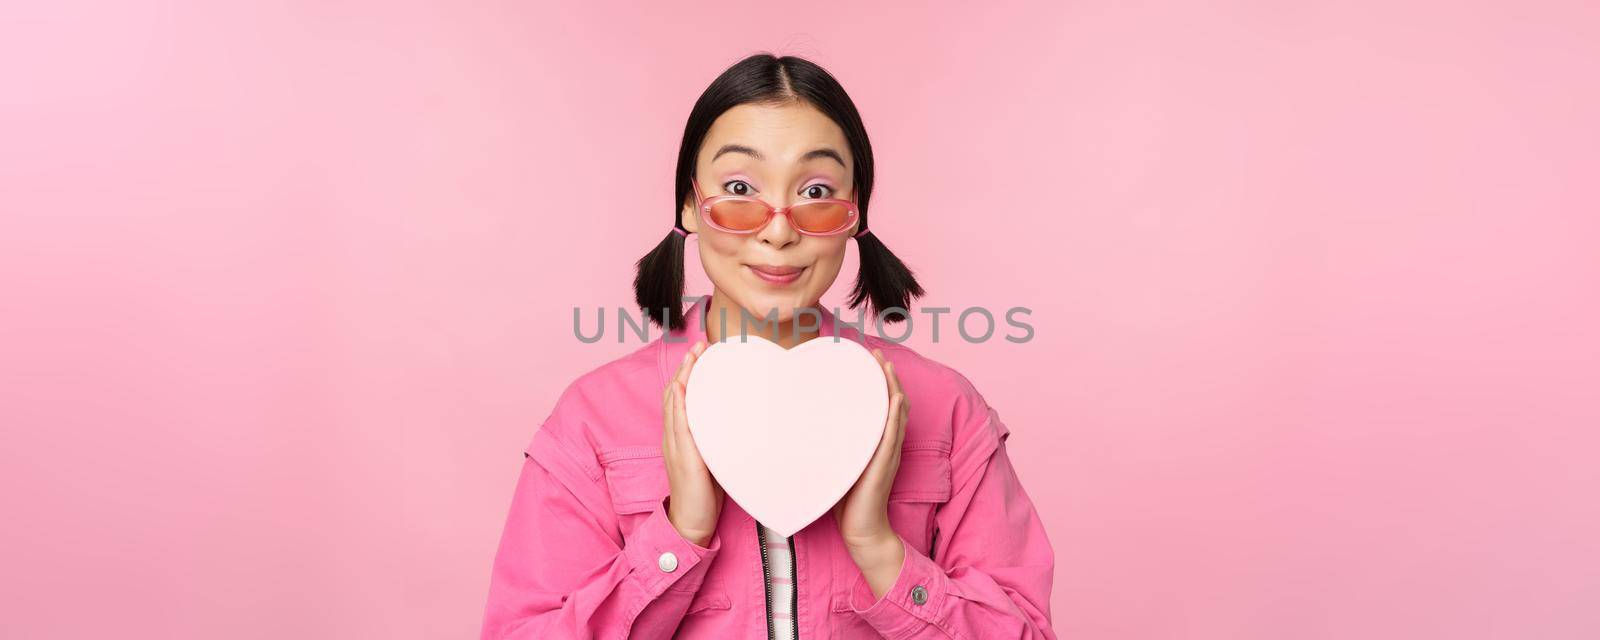 Beautiful asian girl smiling happy, showing heart gift box and looking excited at camera, standing over pink romantic background.